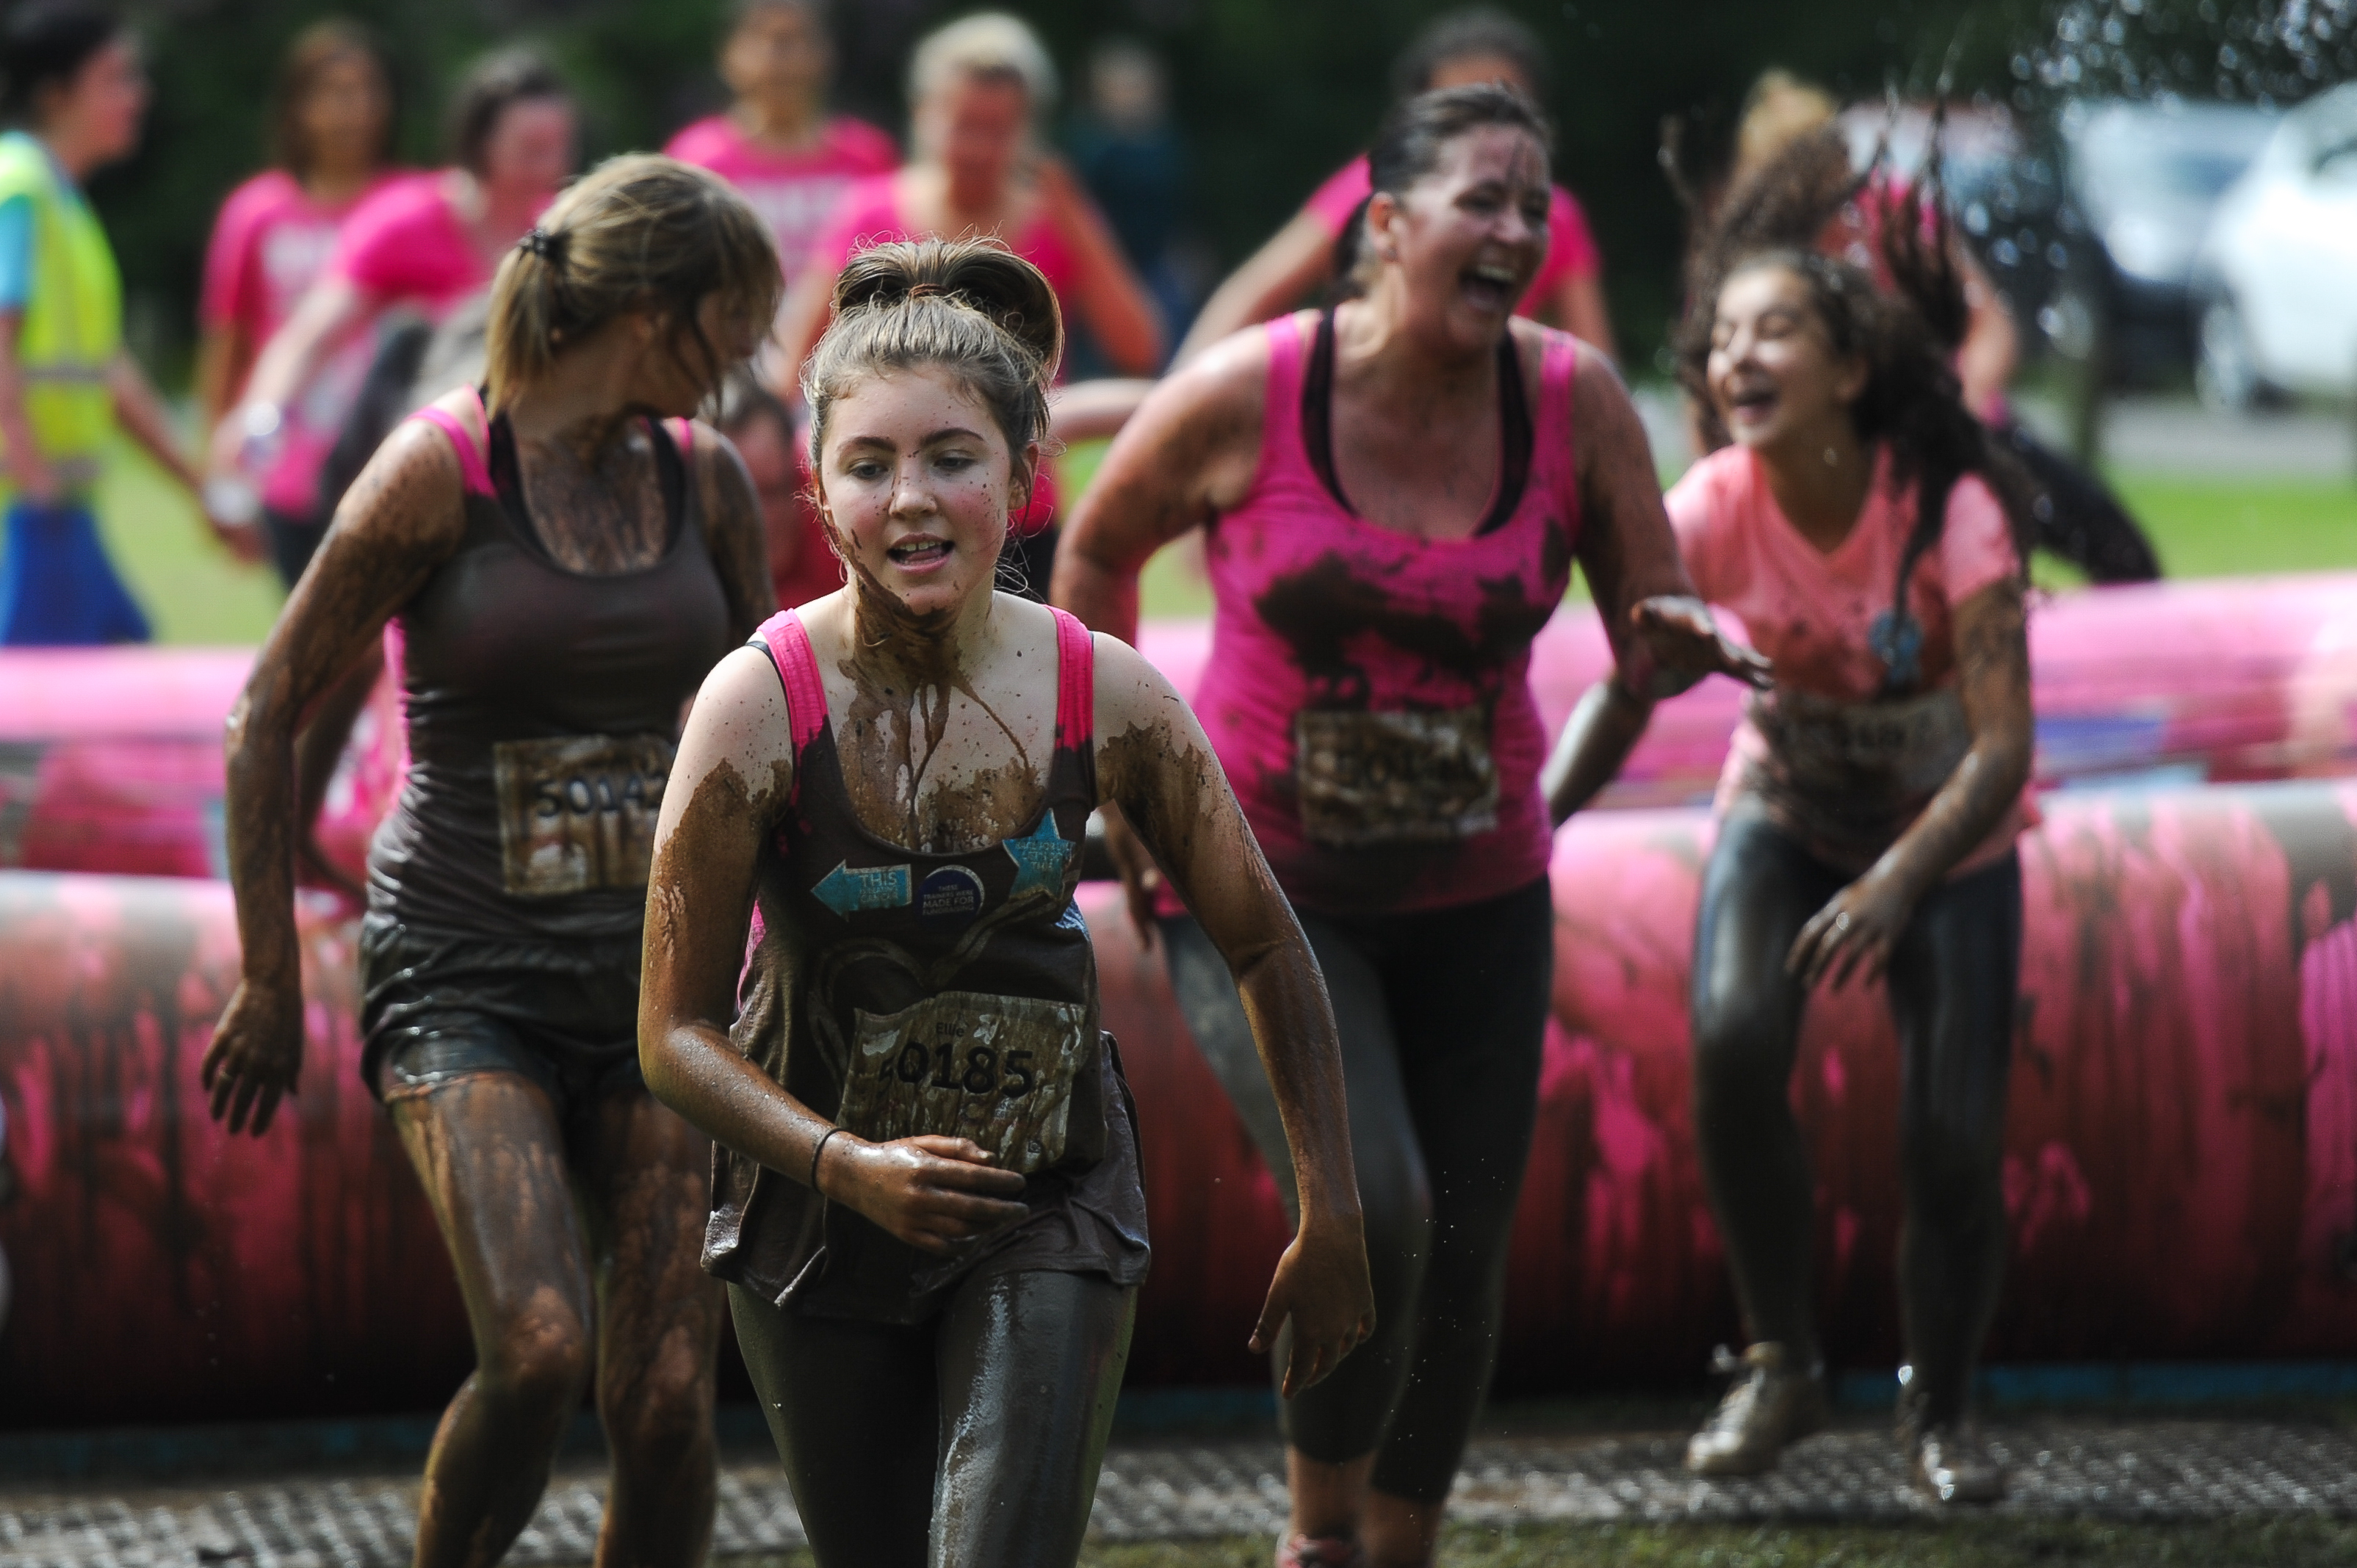 Runners caked in mud during Saturday's Pretty Muddy event.